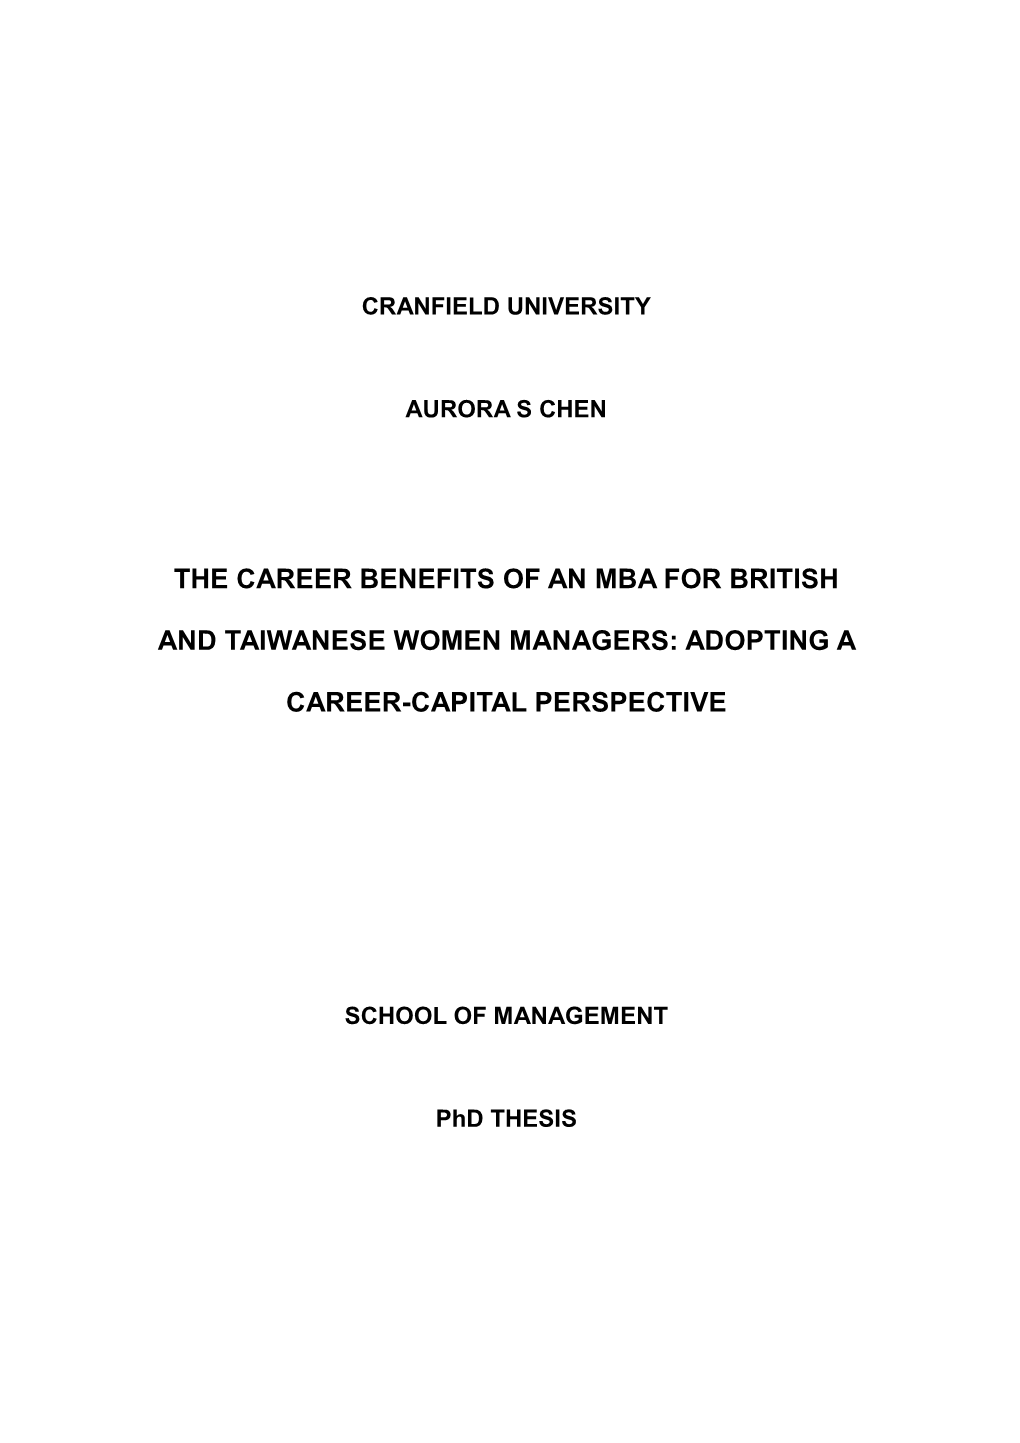 The Career Benefits of an MBA for British and Taiwanese Women Managers: Adopting a Career-Capital Perspective